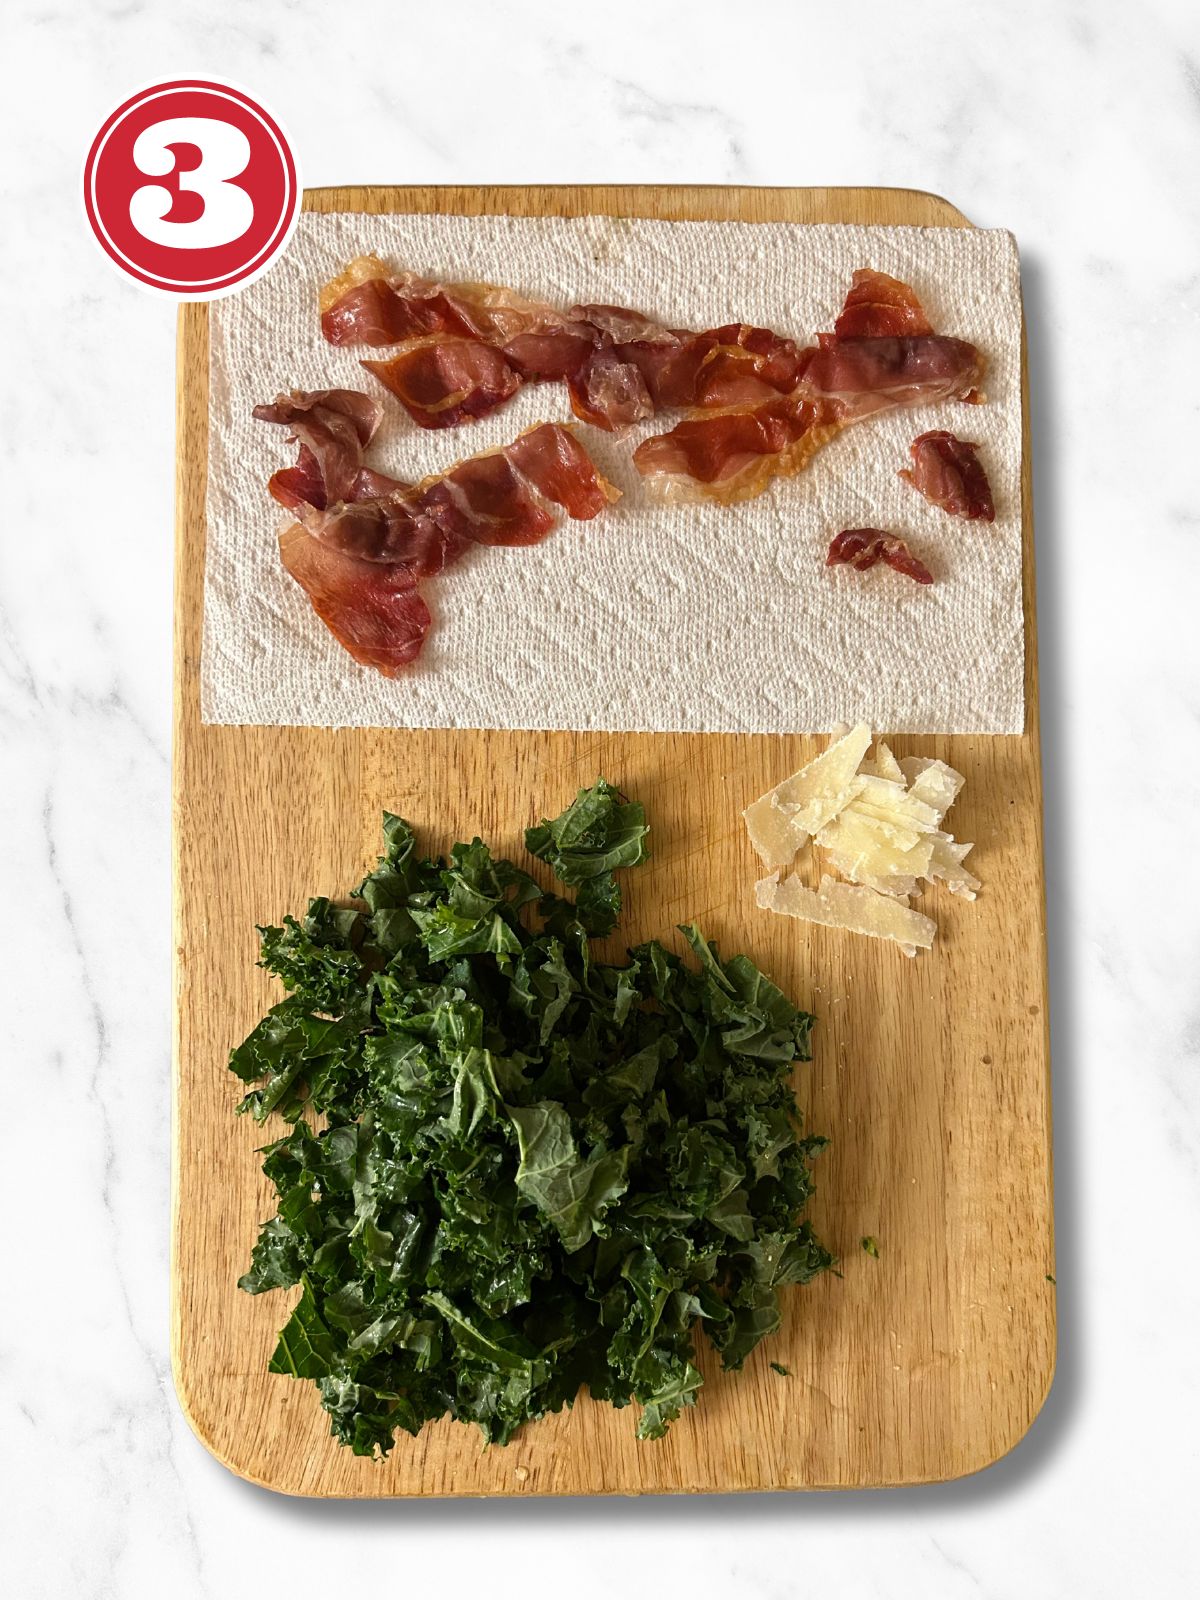 prosciutto, kale and parmesan shavings on a cutting board